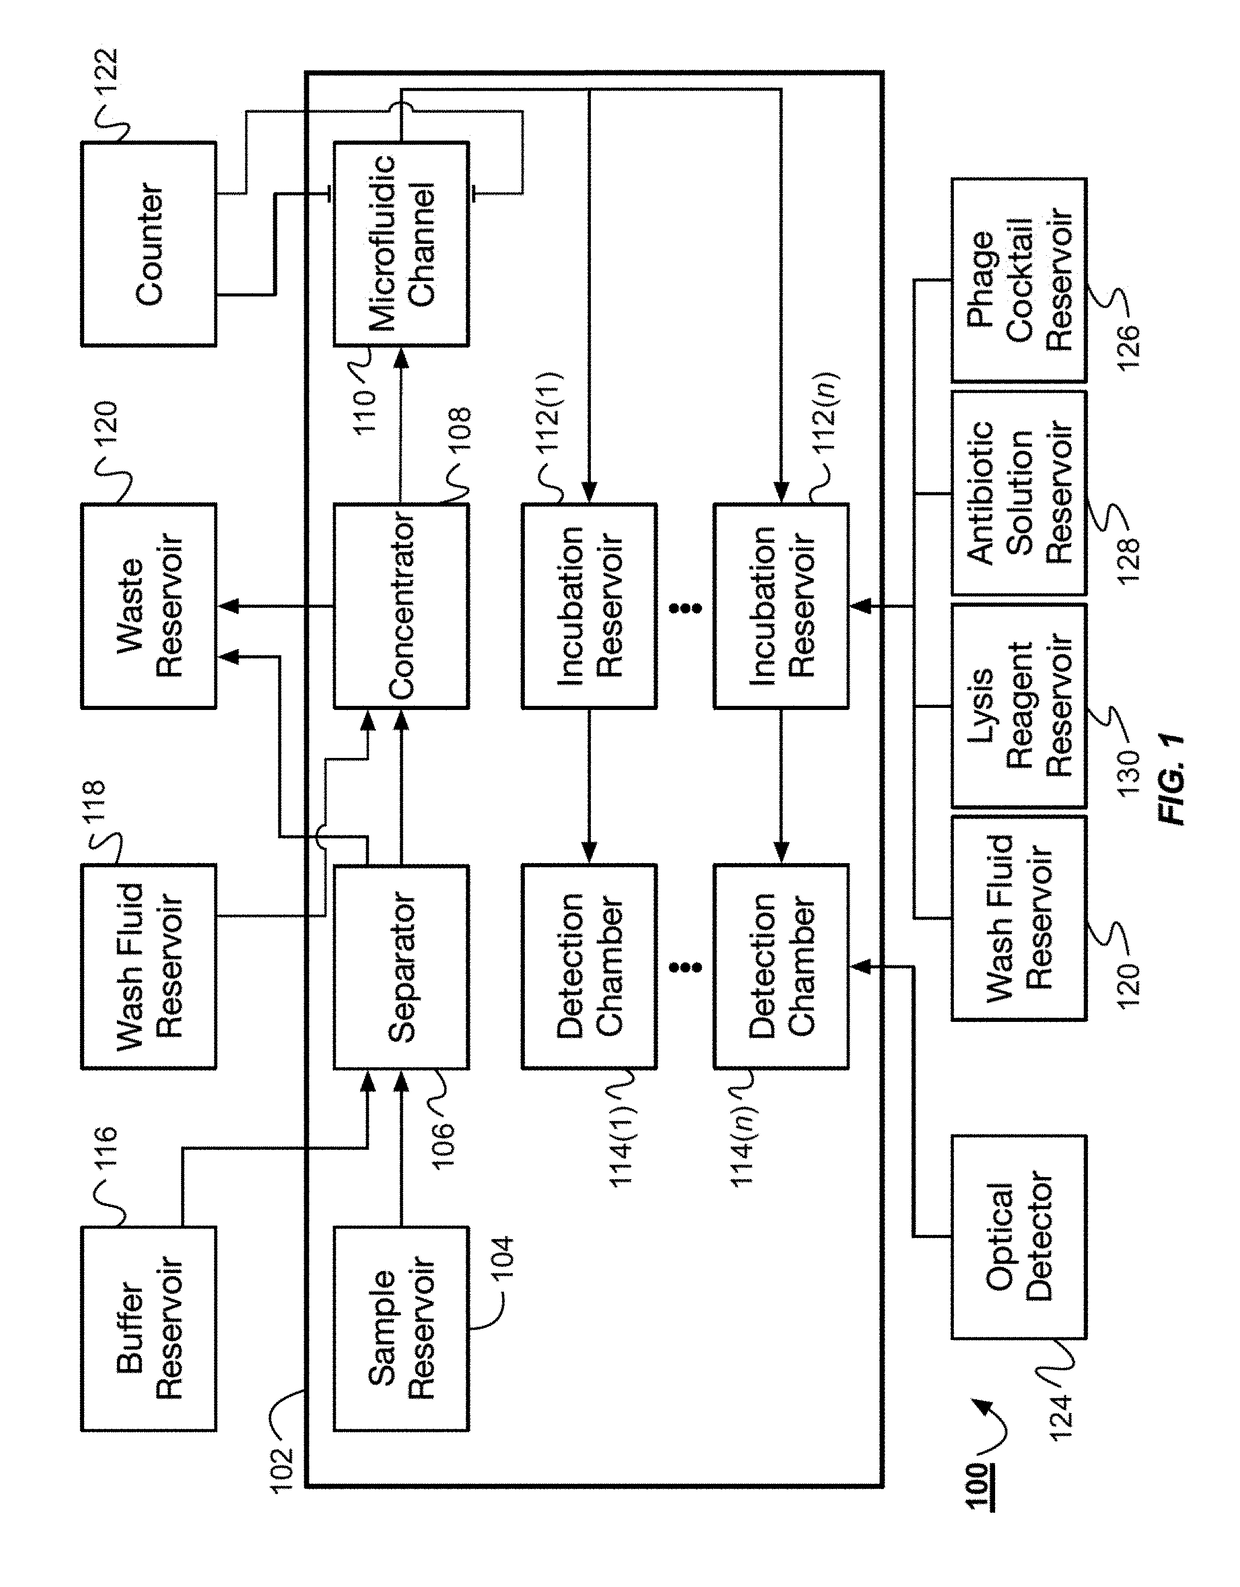 Bacteria identification and antibiotic susceptibility profiling device